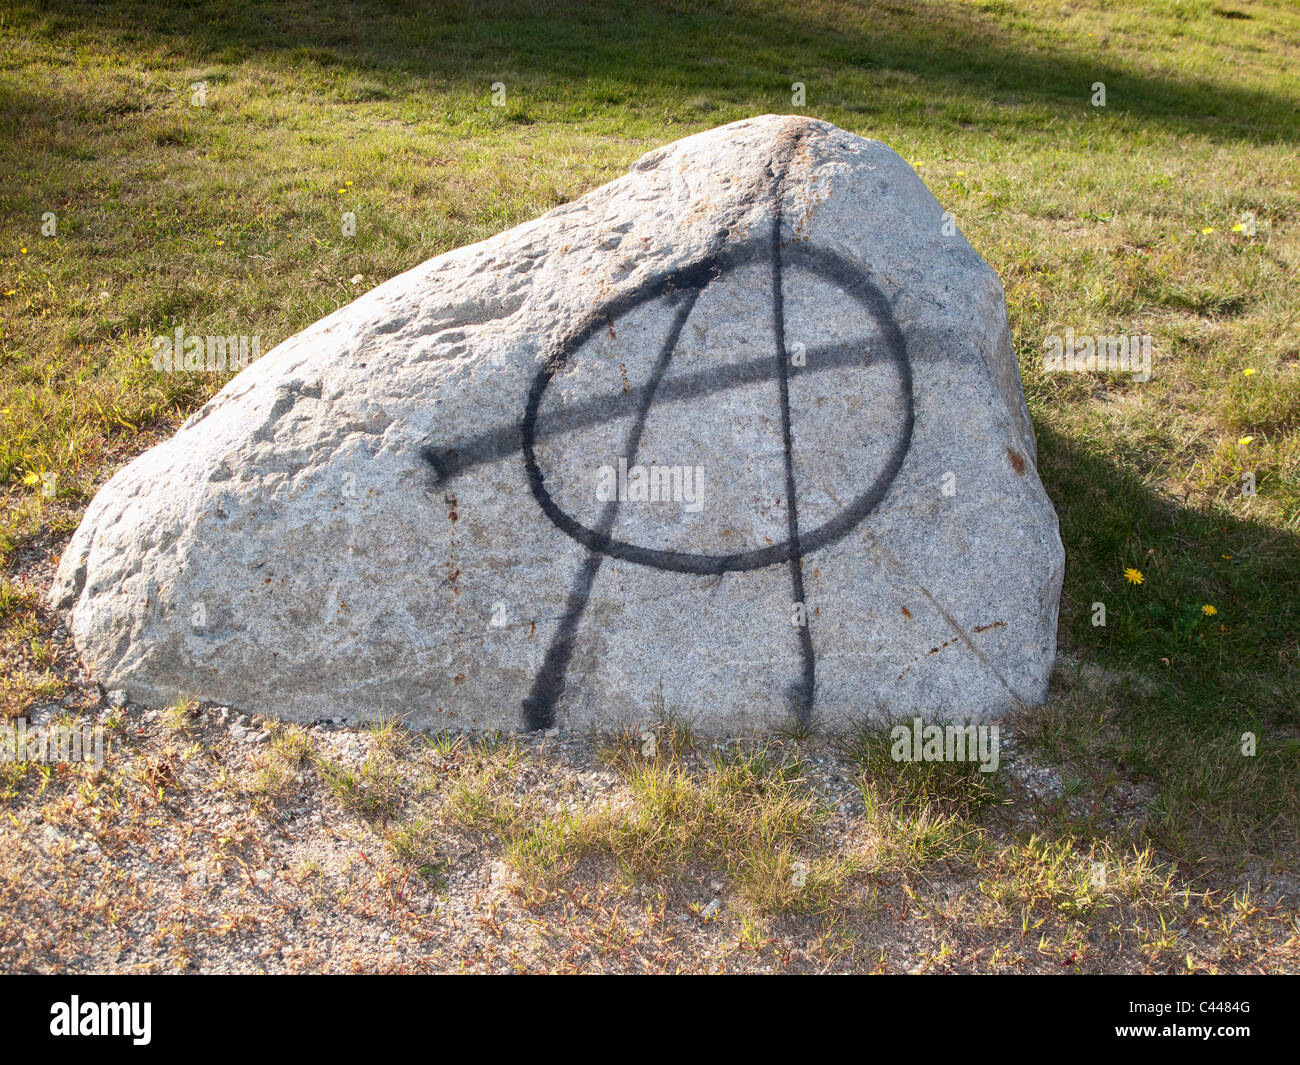 The well-known anarchy symbol Circle-A spray painted on a rock Stock Photo